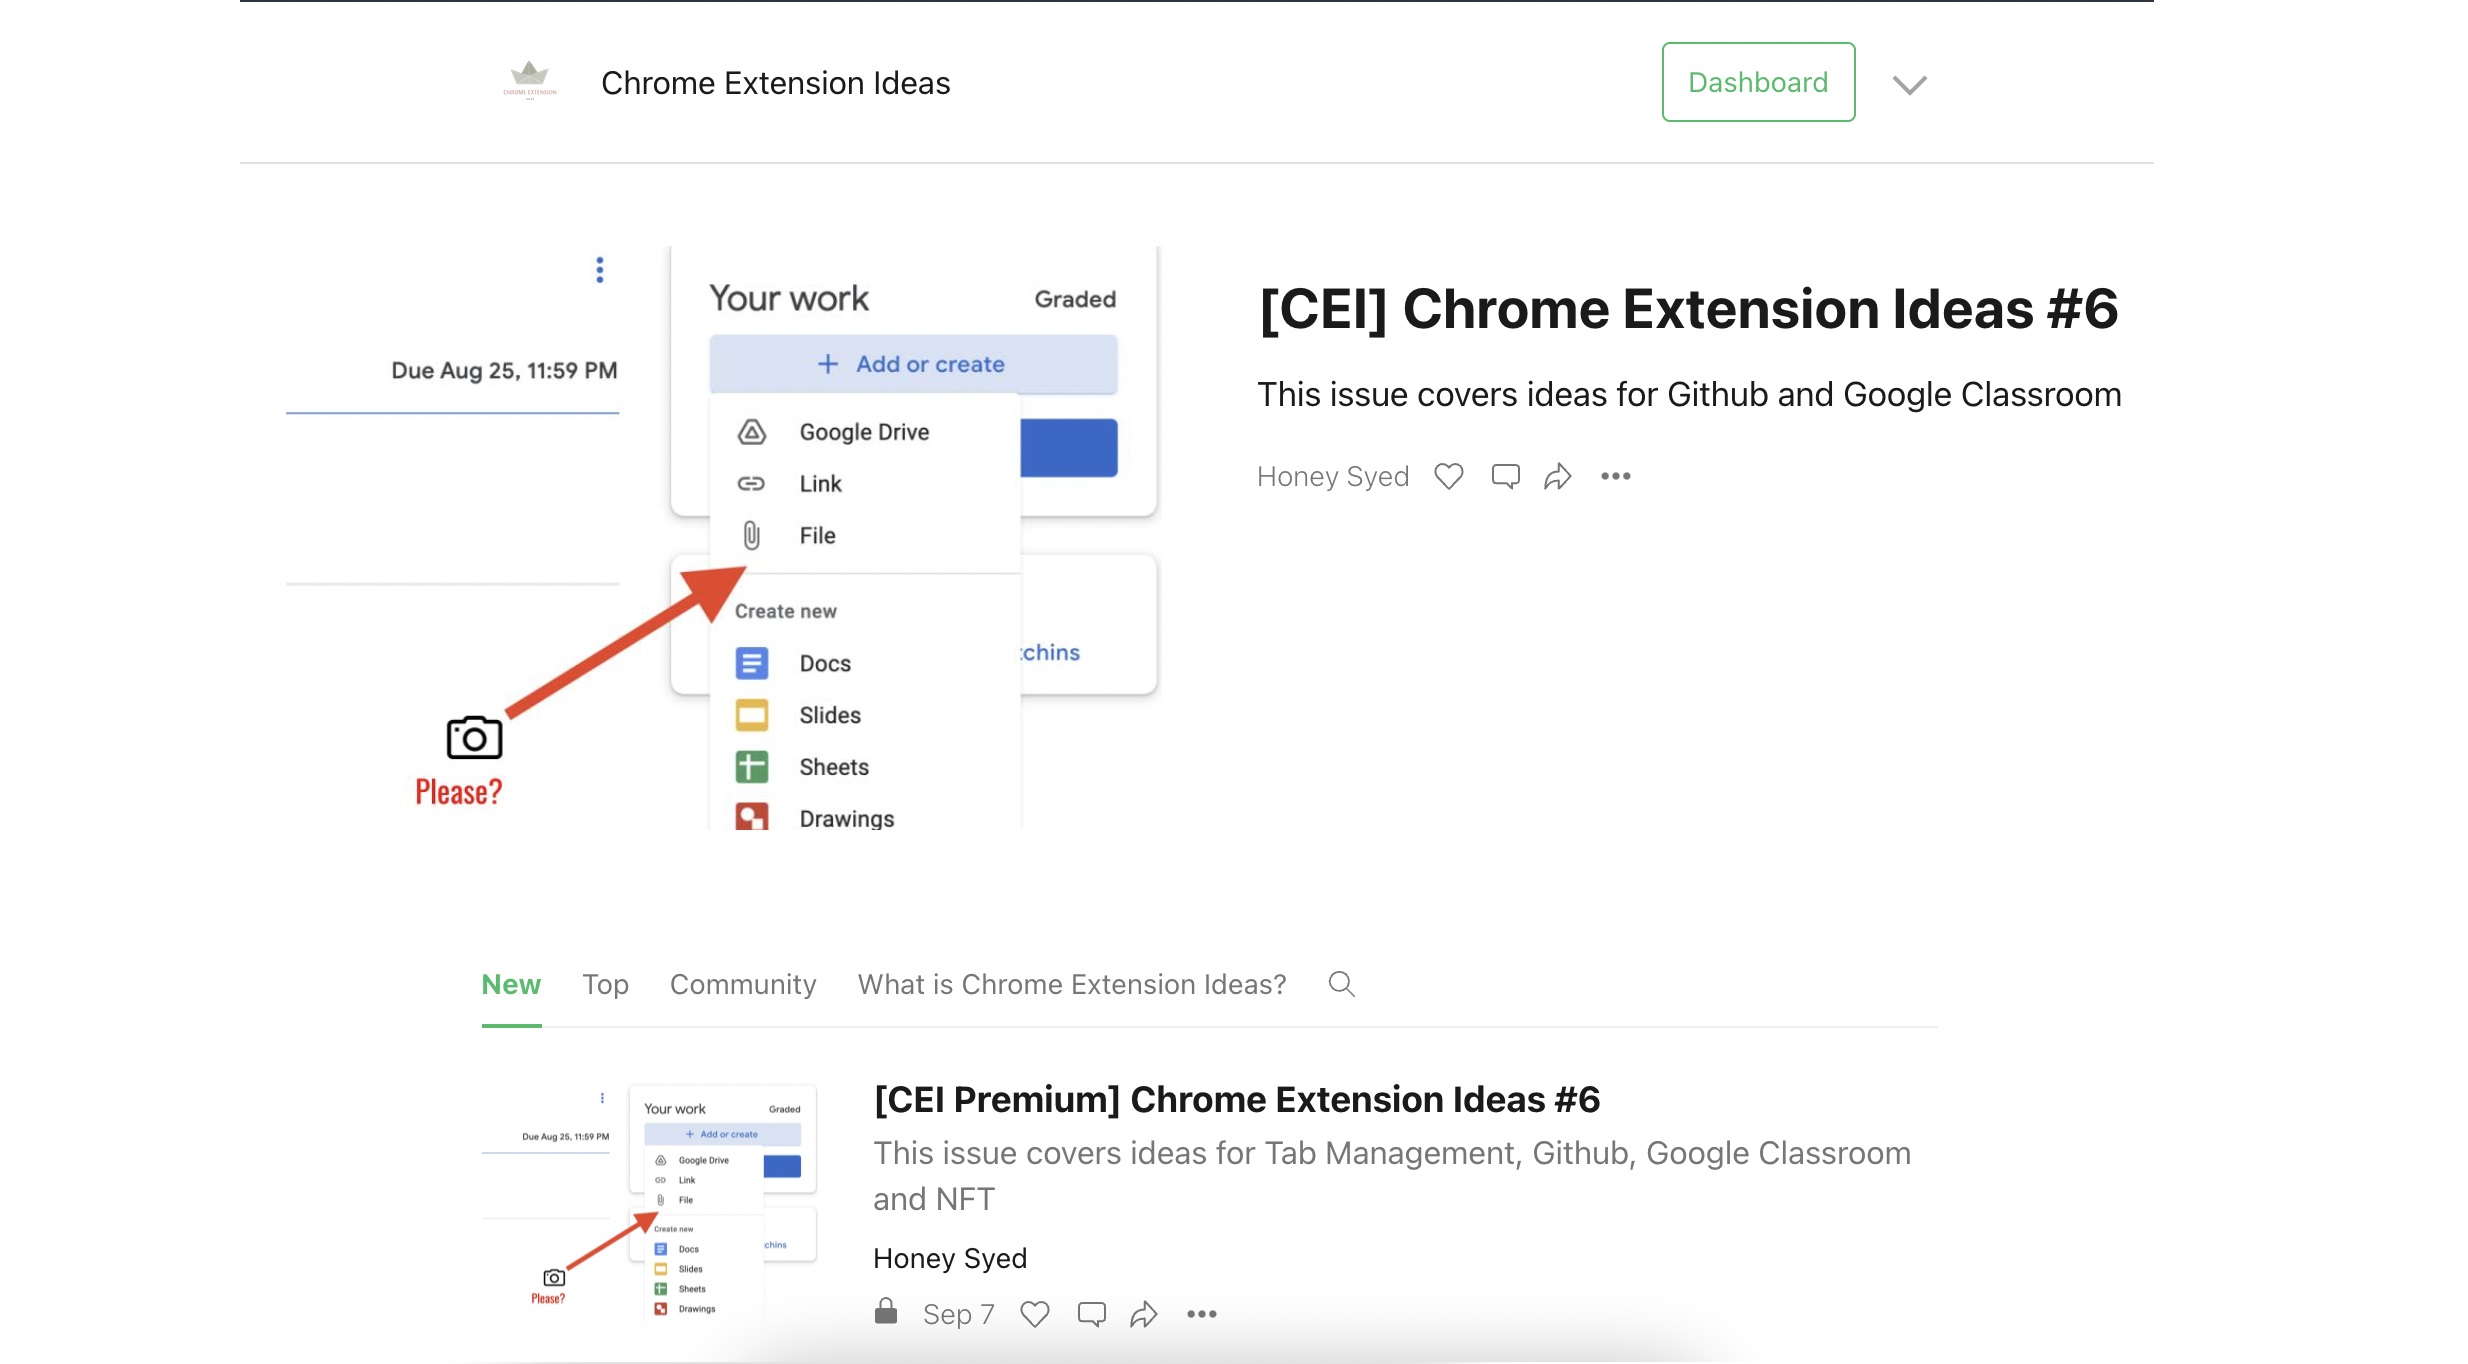 Get feedback from a vast remote working audience about Chrome Extension Ideas